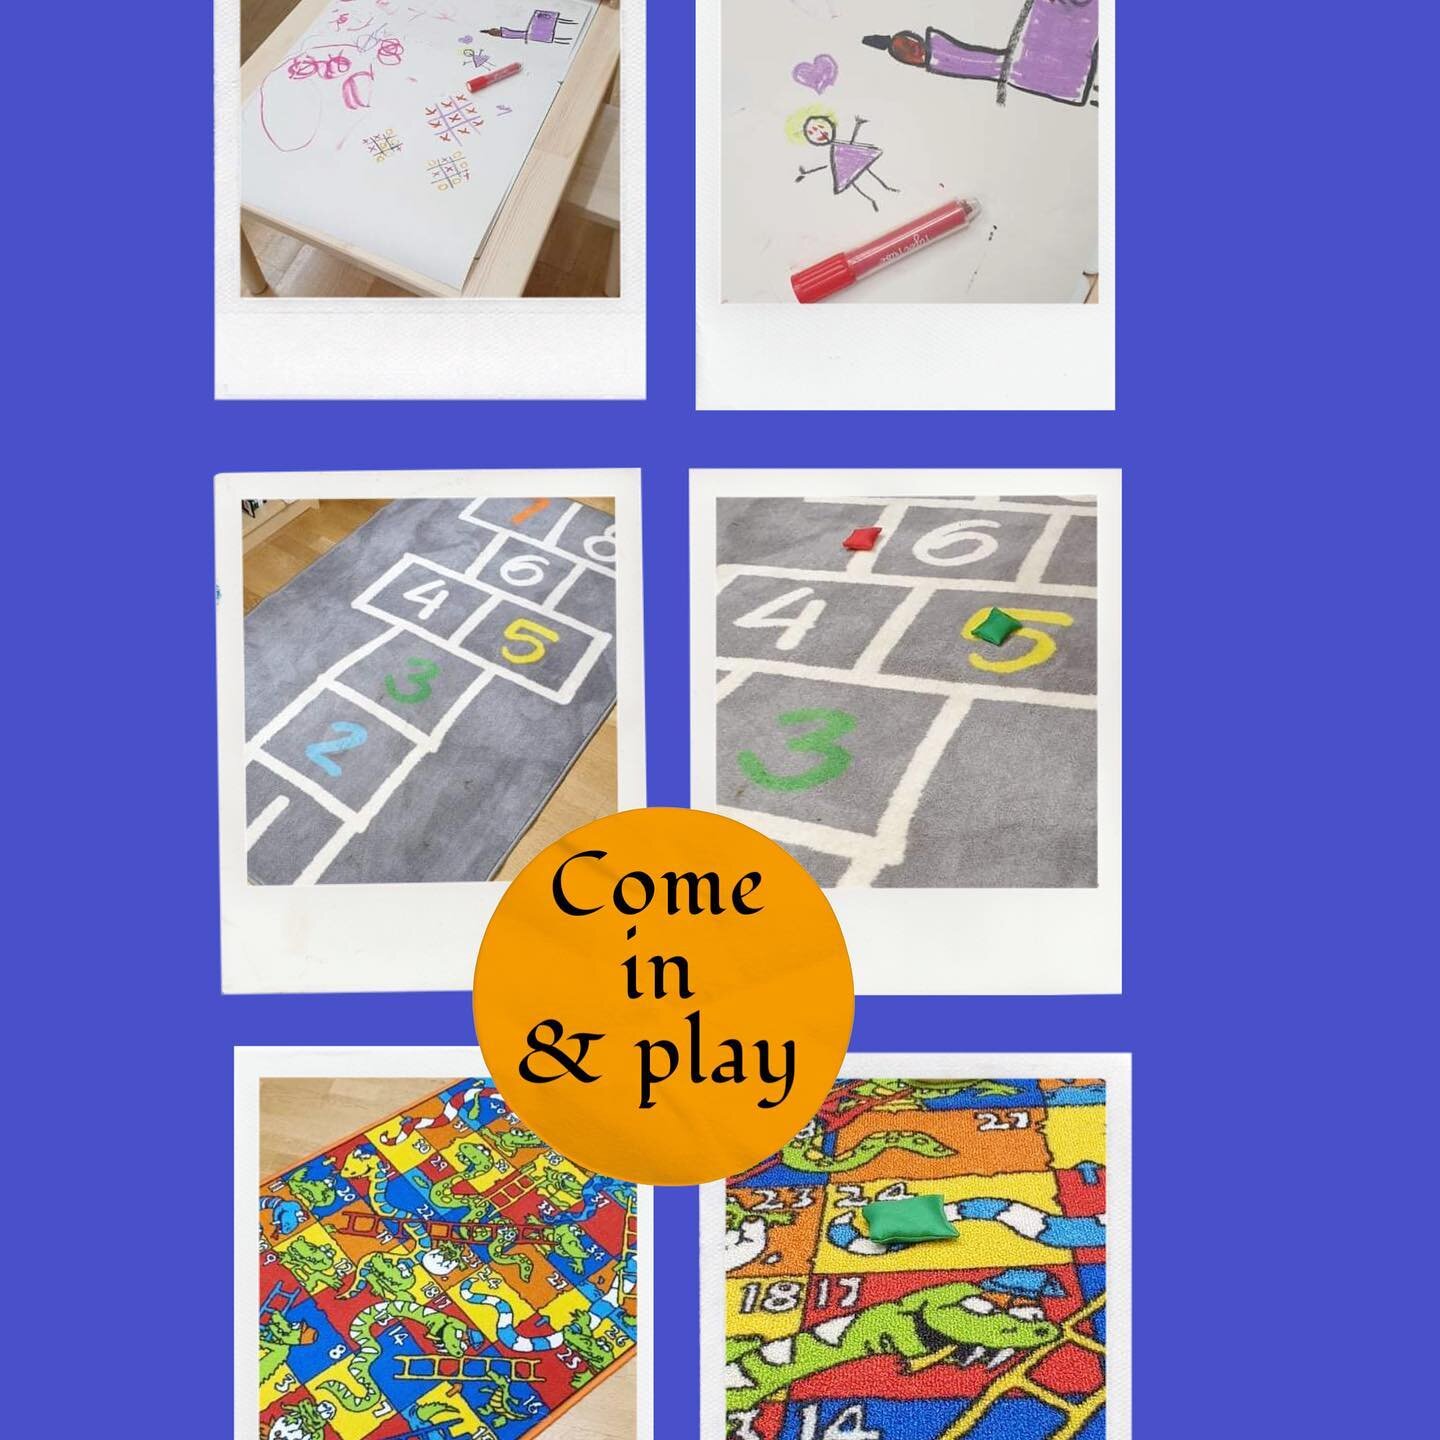 Are you looking for something to do in this wet weather? Feel free to pop in and say&rdquo;Hi&rdquo; and while your here why not enjoy a game or some arts #winterfestival #bridgetowndiscovery #shoplocal #bridgetownwa #game #hopscotch #snakesandladder